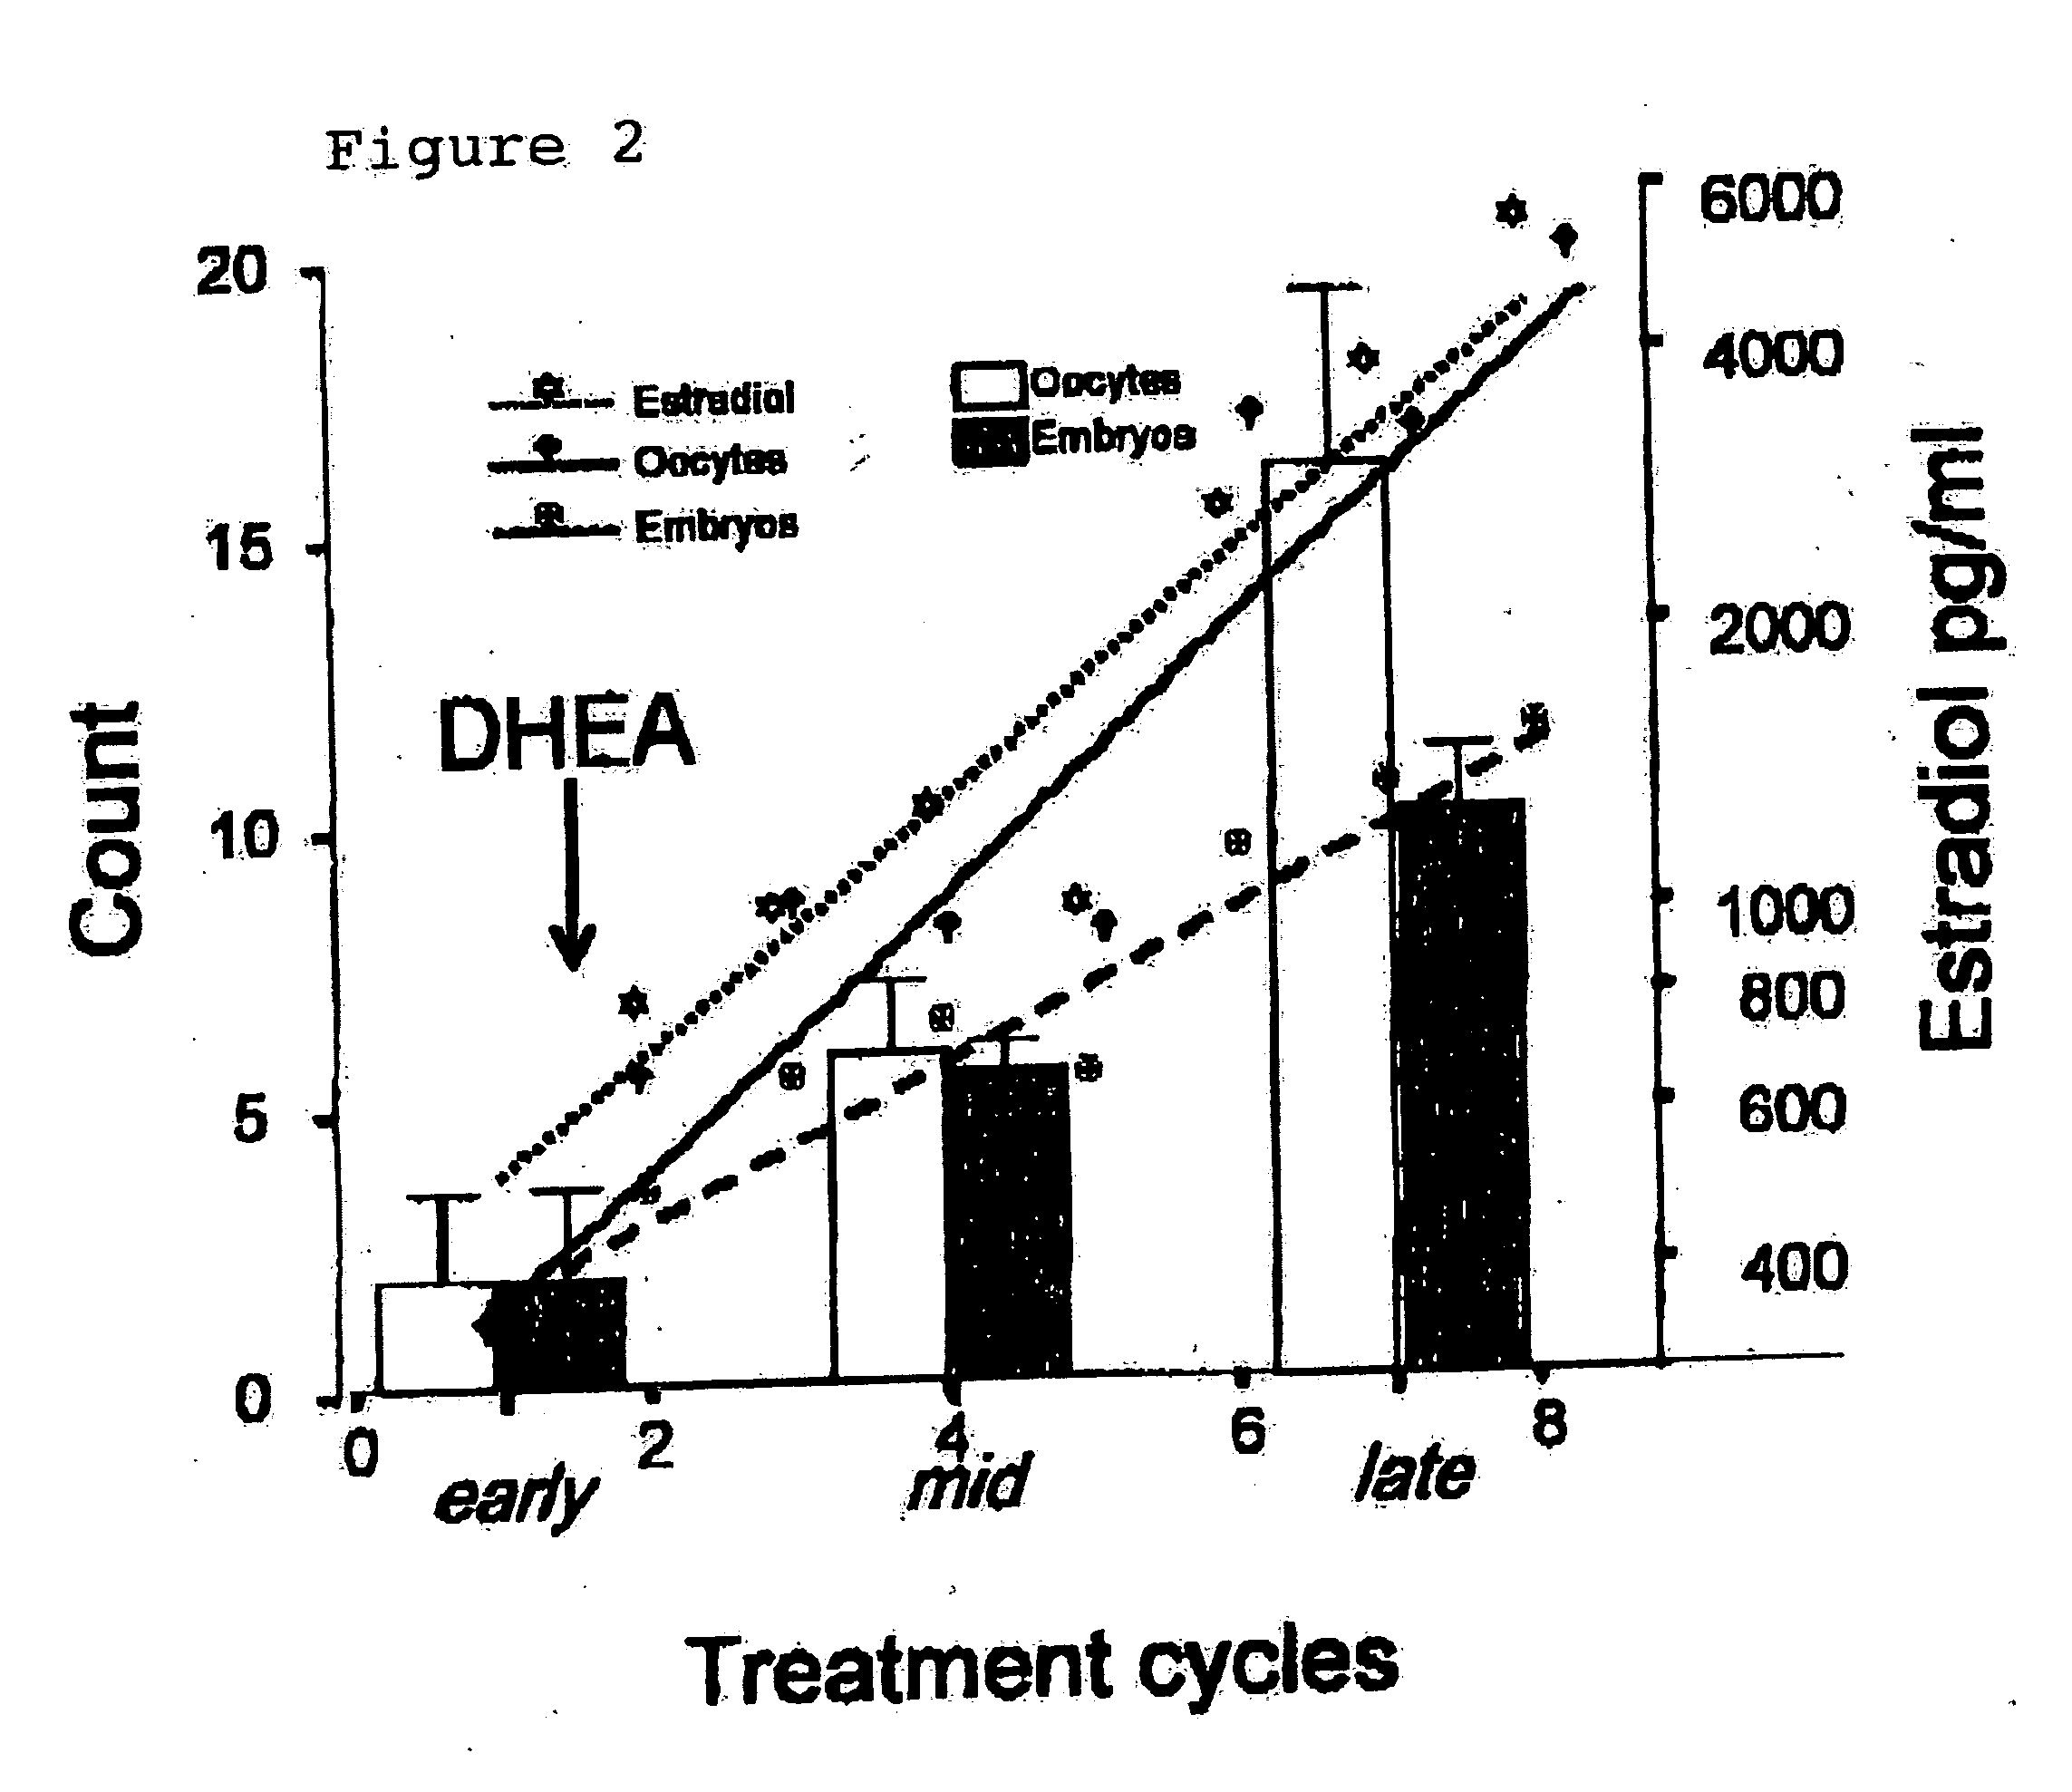 Method of improving ovulation induction using an androgen such as dehydroepiandrosterone